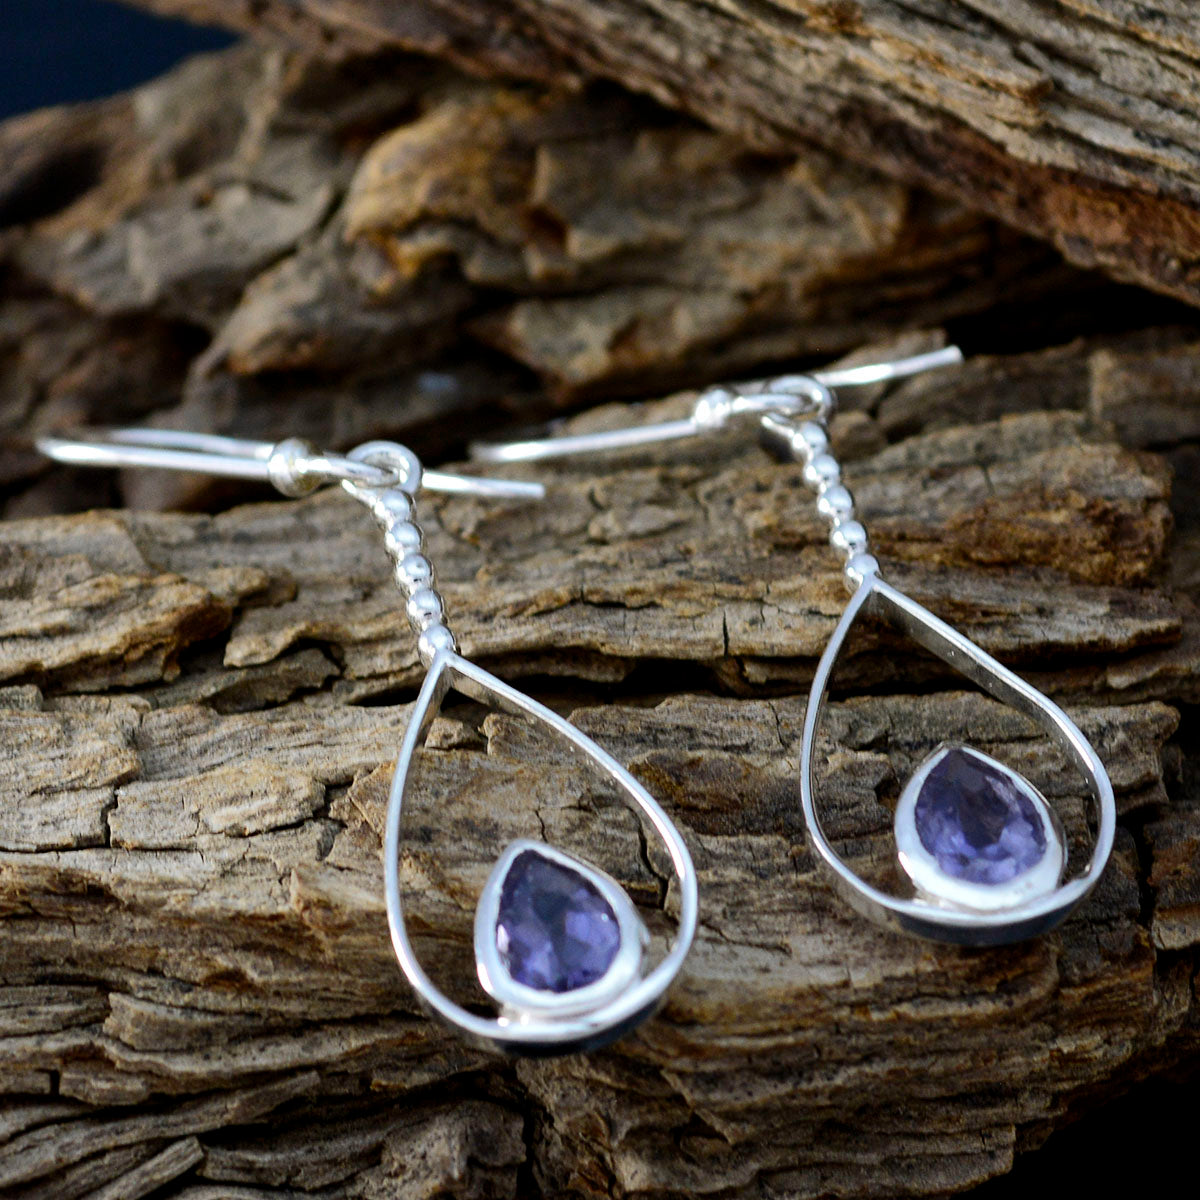 Riyo Real Gemstones Pear Faceted Nevy Blue Iolite Silver Earring gift for brithday